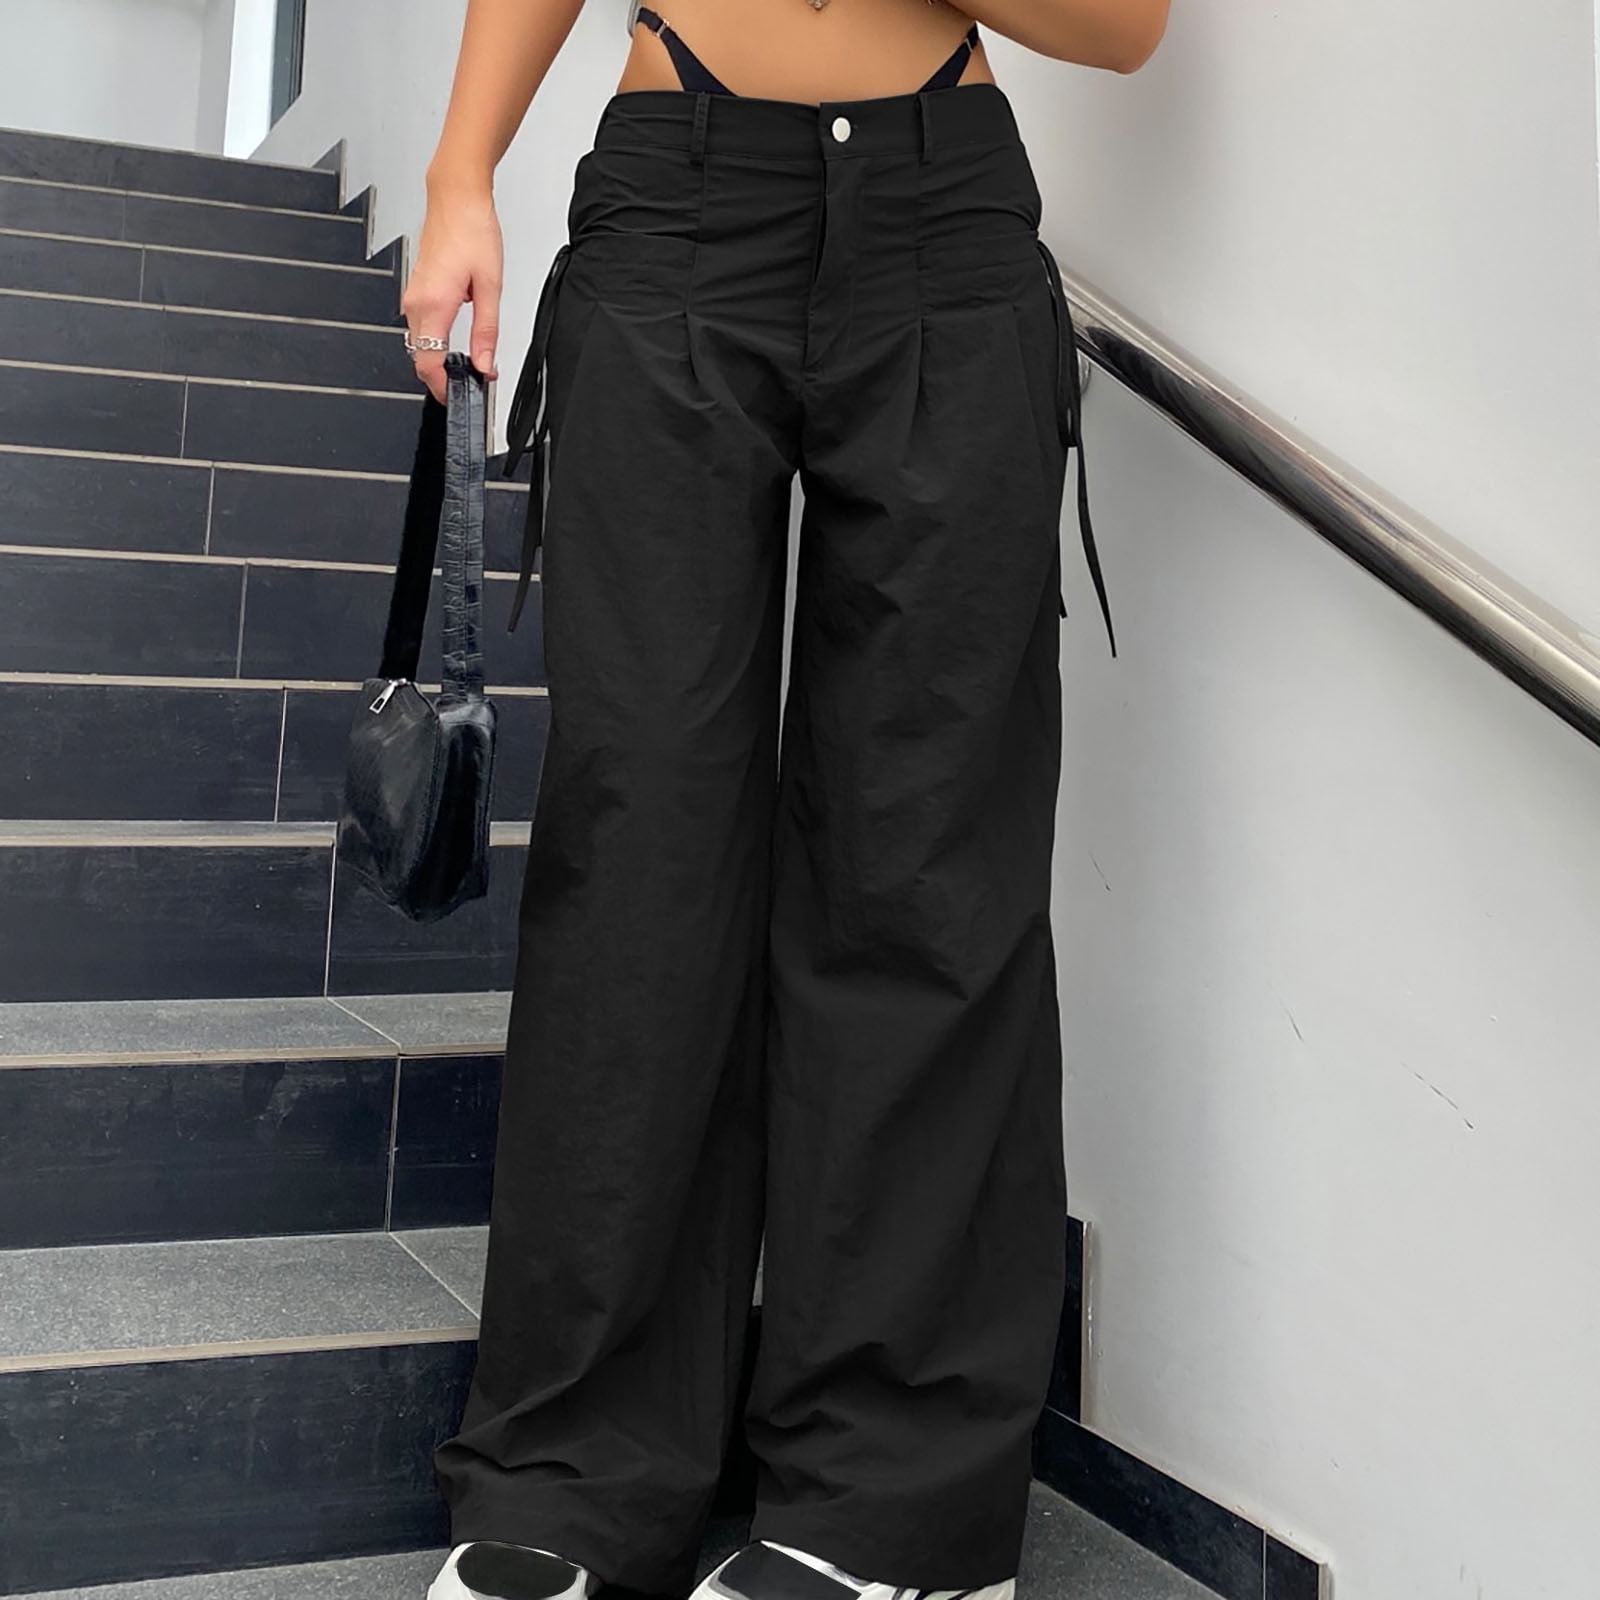 Low Design Plus Y2K Pants Multi Overalls With Running Street Trendy SELONE Sports Women Pockets Fashion Everyday Style Workout for Sense Low Athletic Pants Pant Waist Rise Black Wear Long Size Cargo